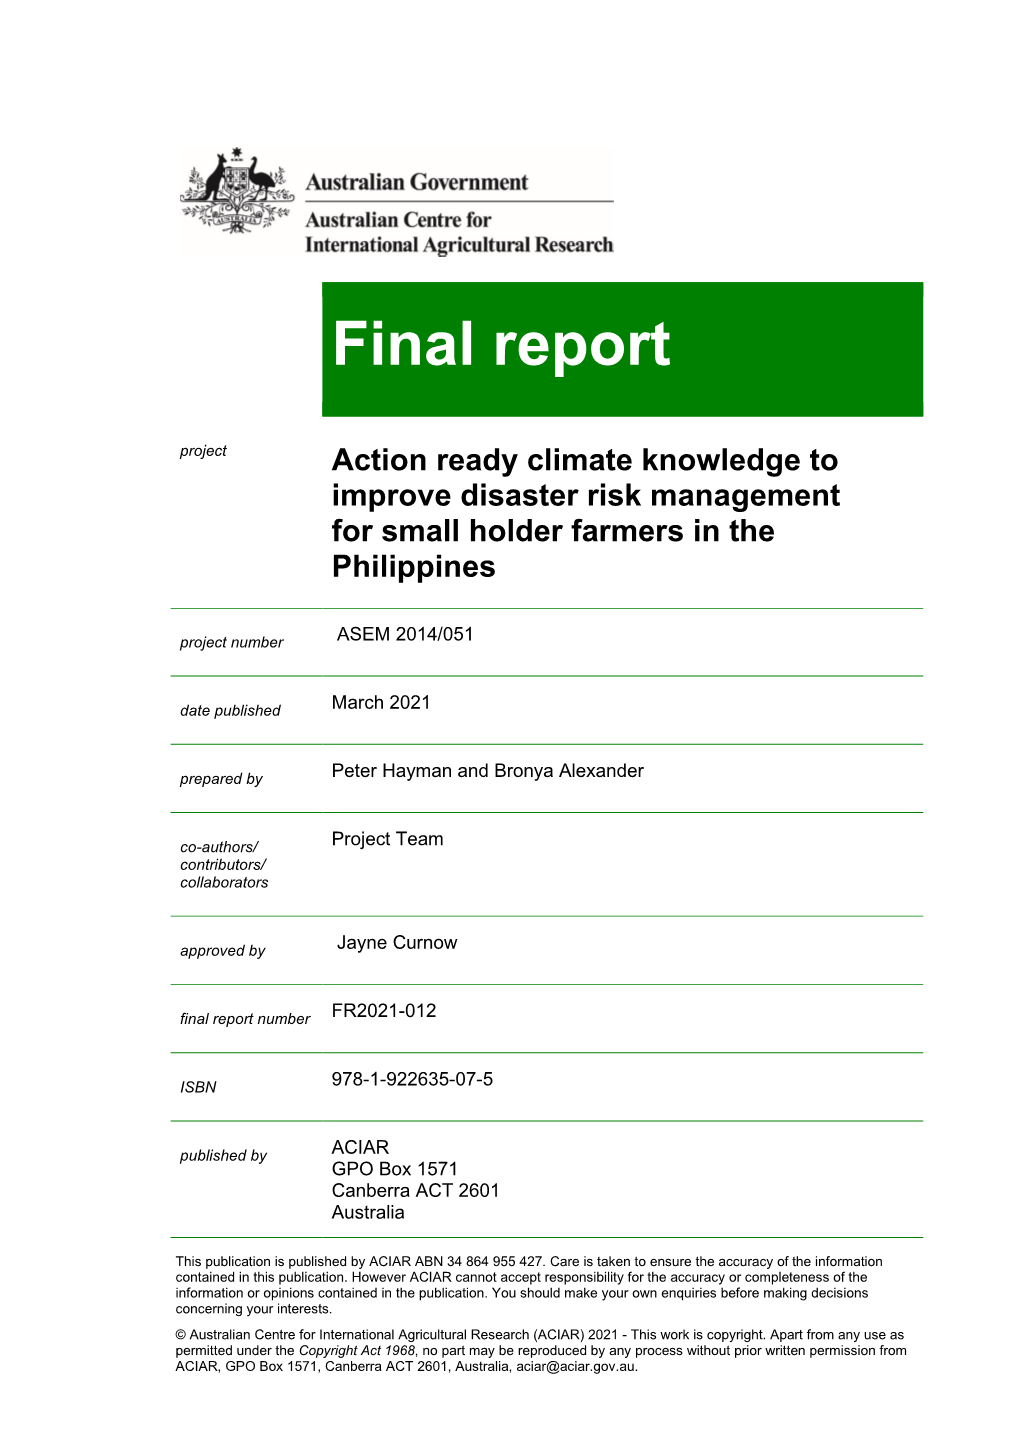 Final Report Project Action Ready Climate Knowledge to Improve Disaster Risk Management for Small Holder Farmers in the Philippines